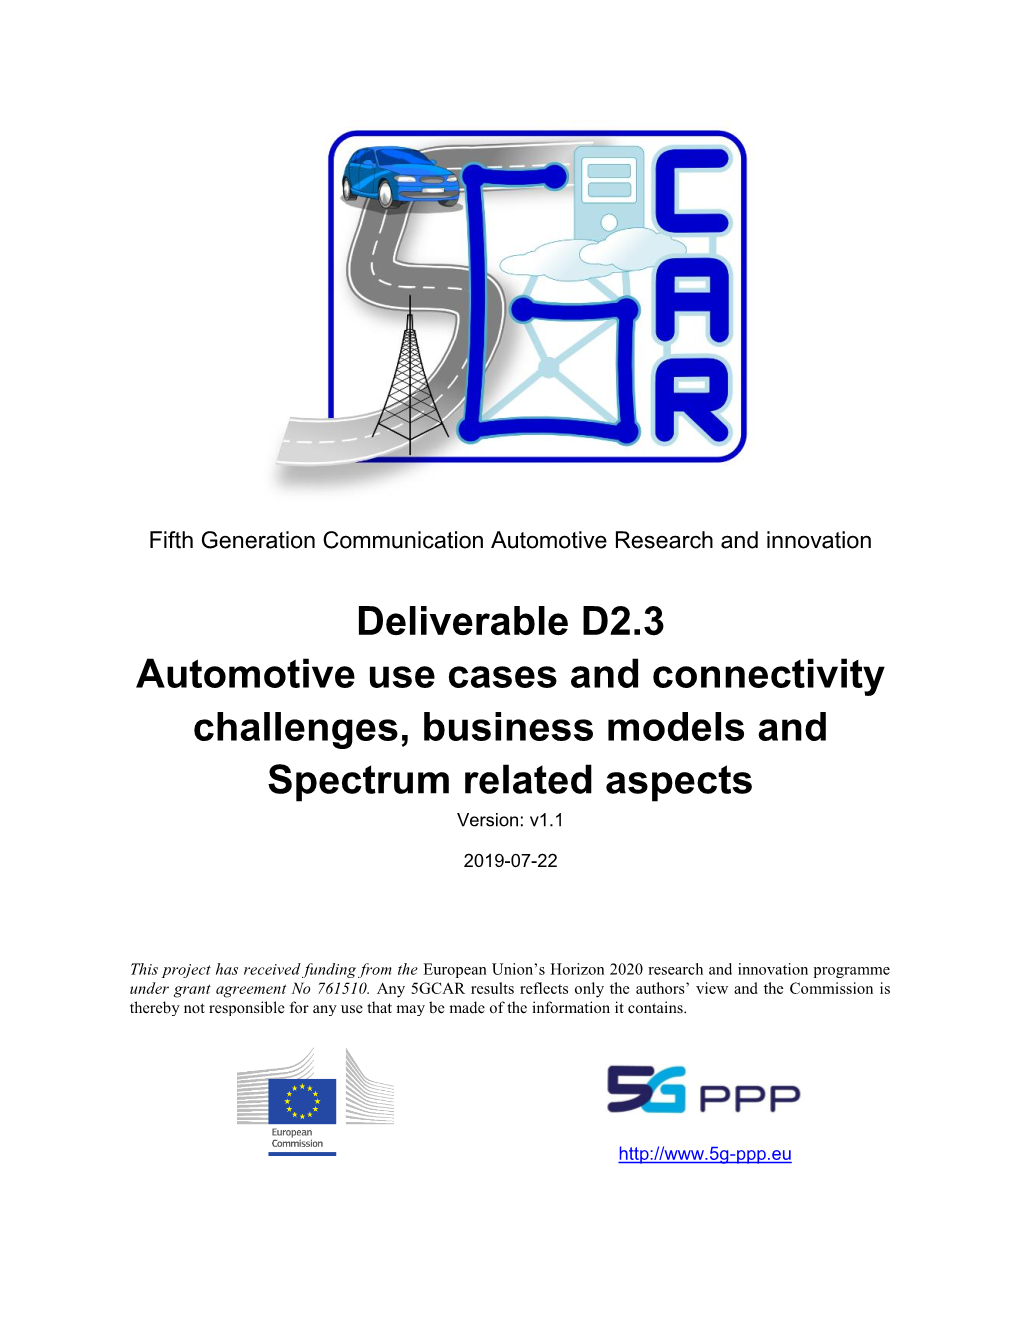 Deliverable D2.3 Automotive Use Cases and Connectivity Challenges, Business Models and Spectrum Related Aspects Version: V1.1